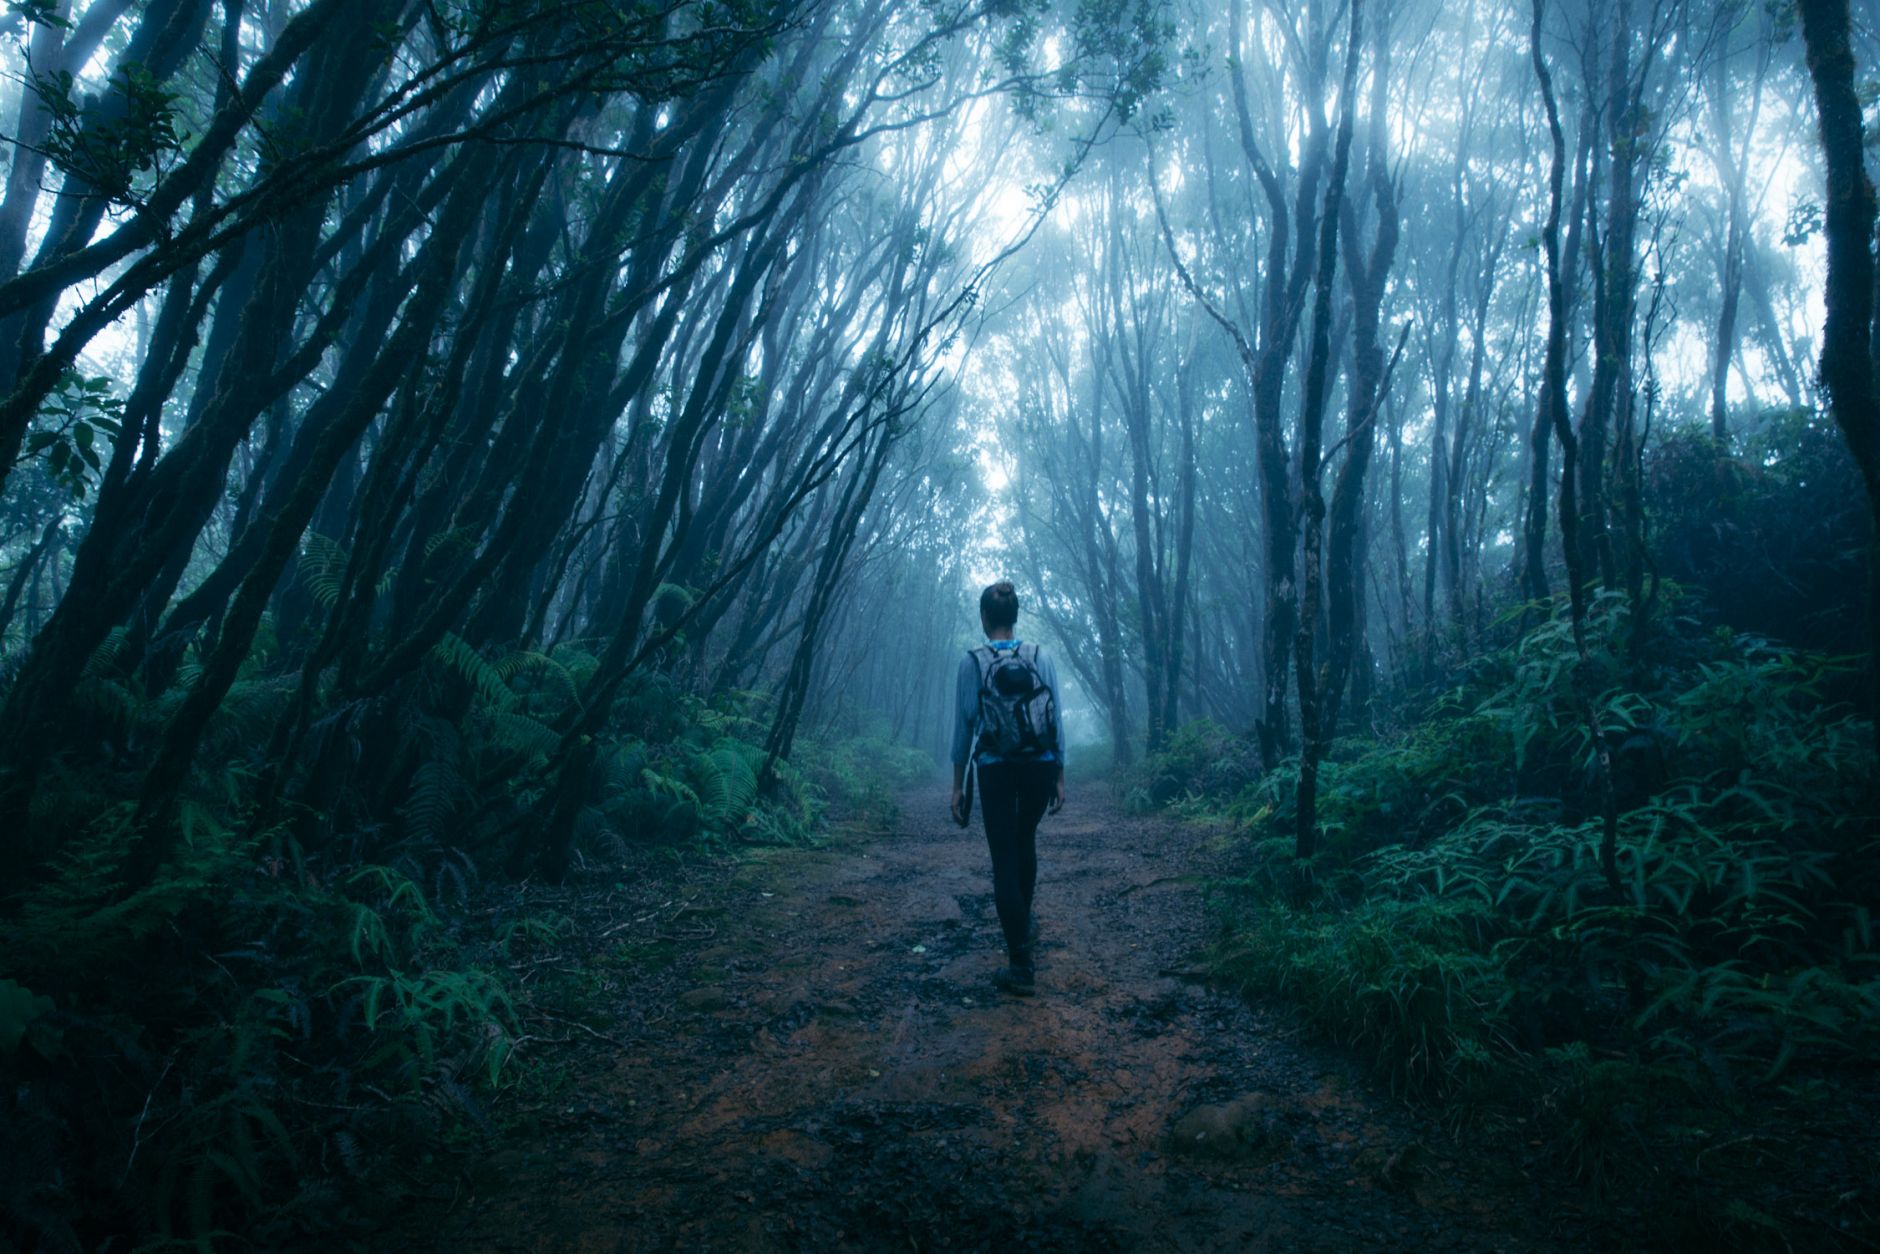 Walking in the mist in a forest, Kalalau Valley, Koke'e State Park, Kaua'i, Hawaii